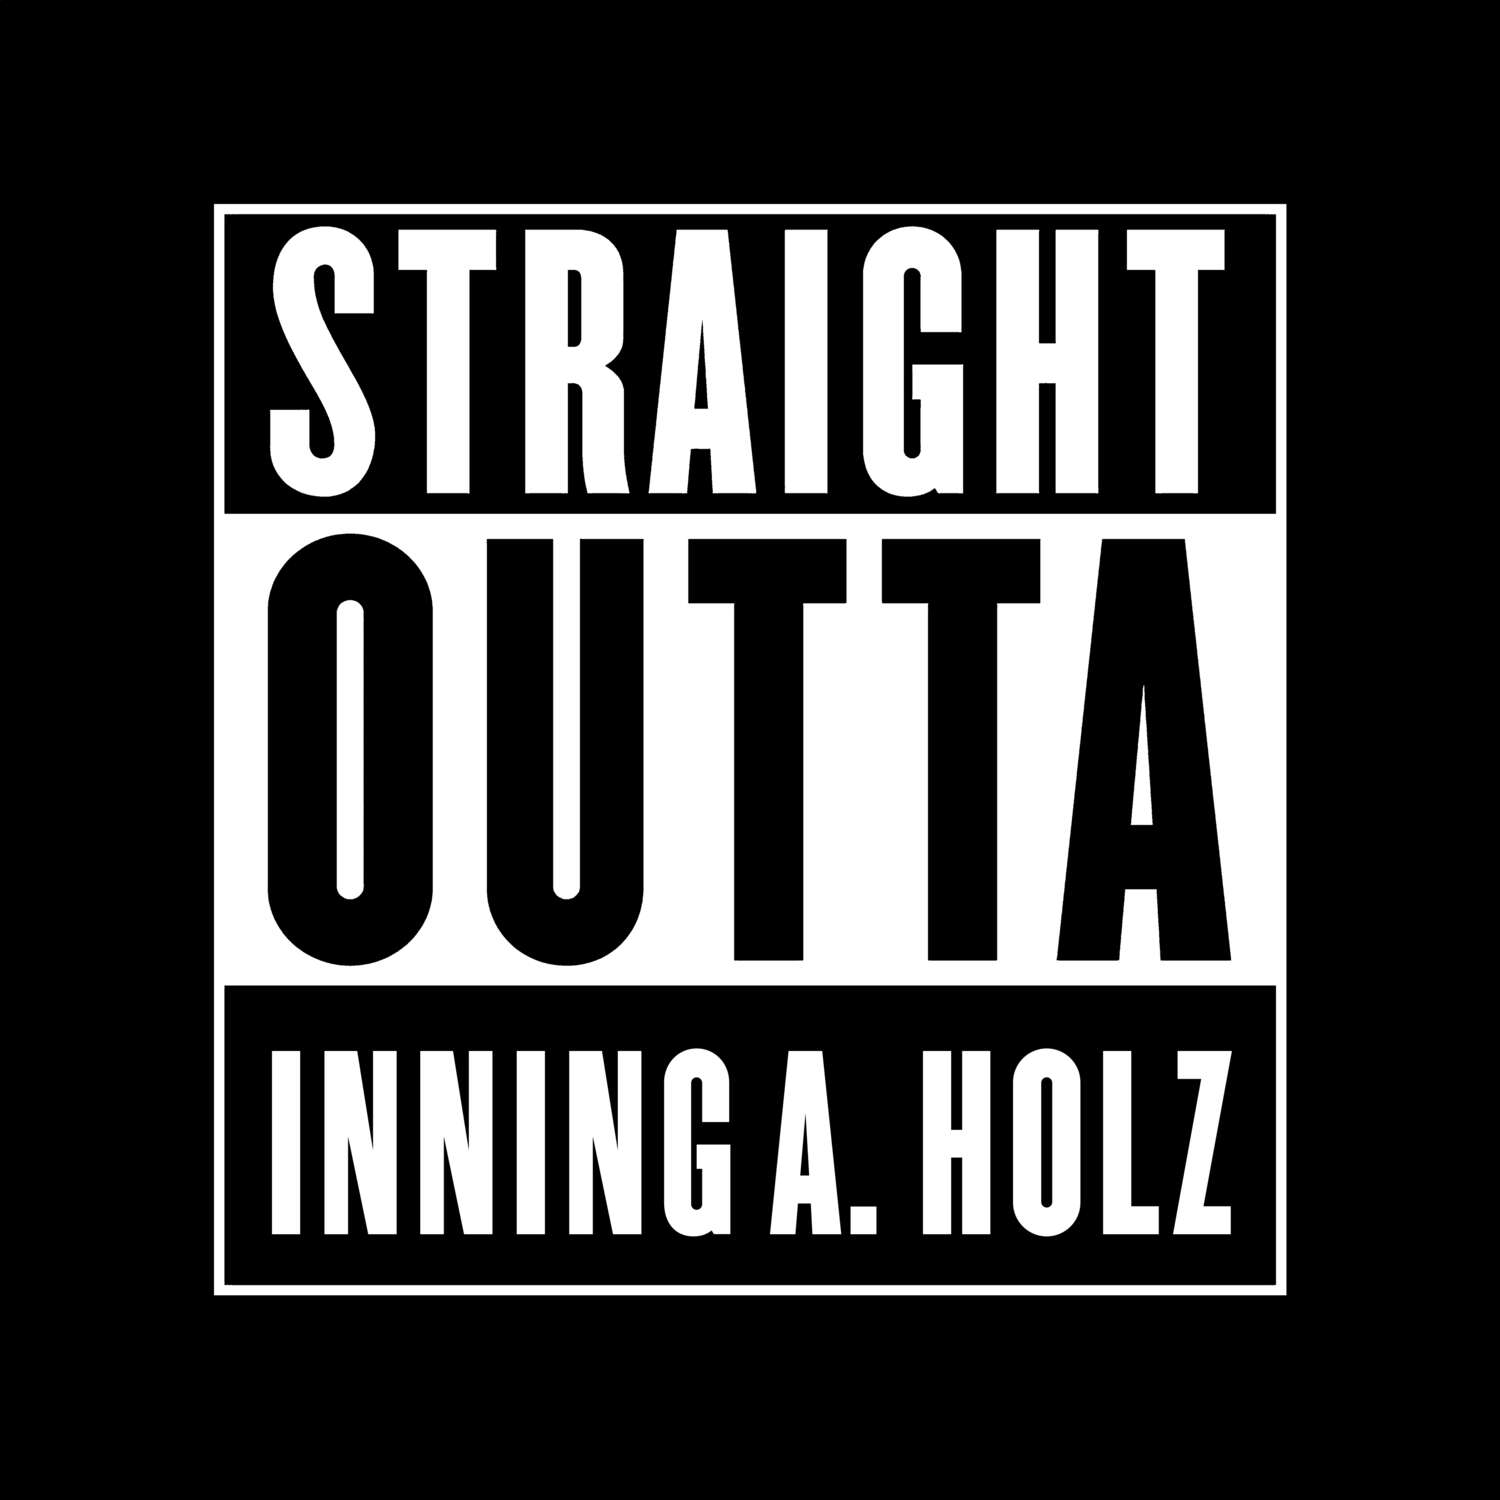 Inning a. Holz T-Shirt »Straight Outta«